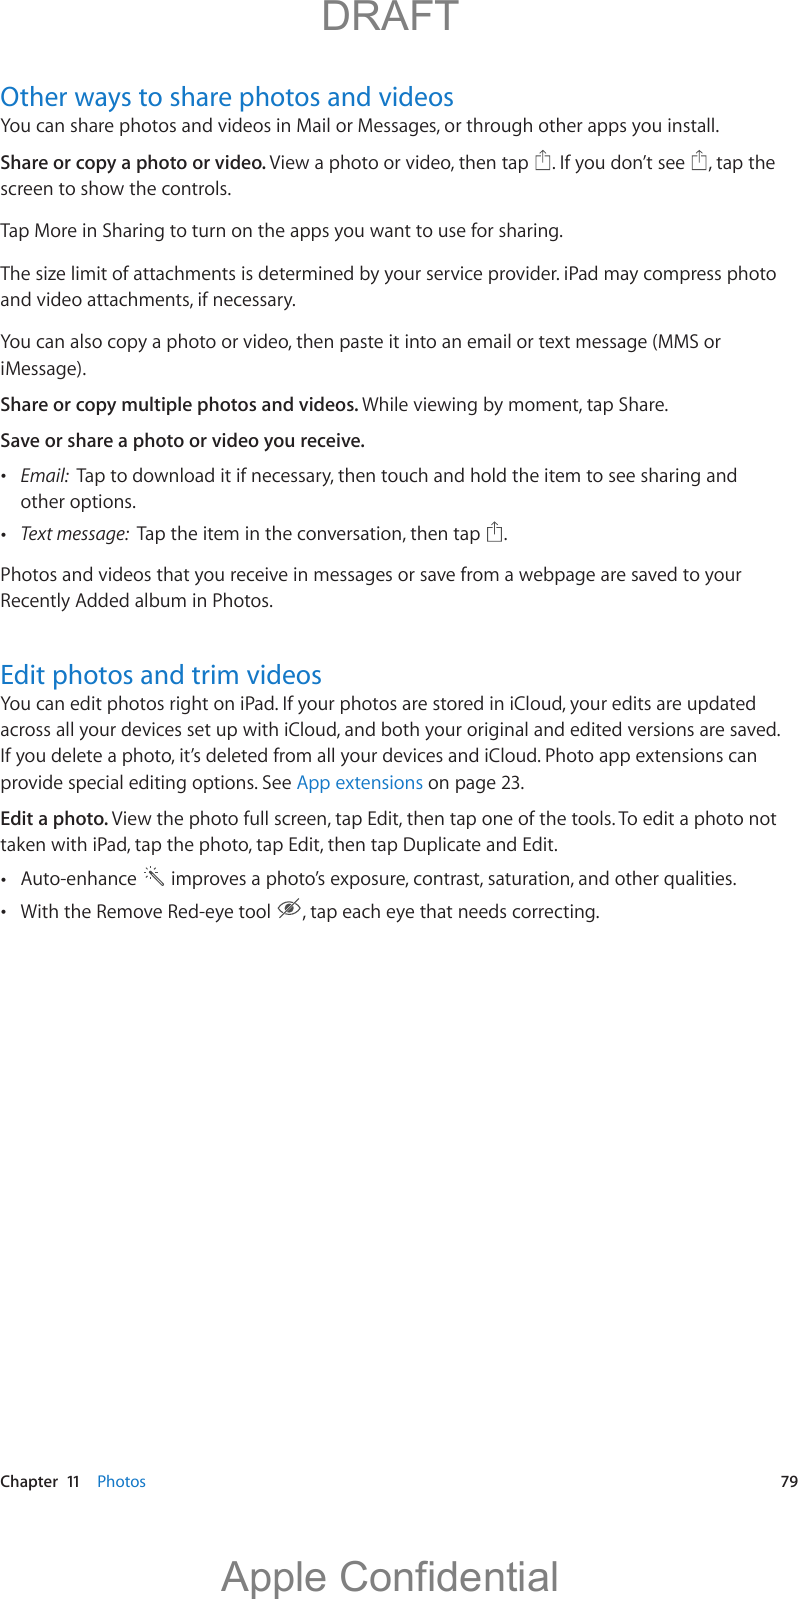   Chapter  11    Photos  79Other ways to share photos and videosYou can share photos and videos in Mail or Messages, or through other apps you install. Share or copy a photo or video. View a photo or video, then tap  . If you don’t see  , tap the screen to show the controls.Tap More in Sharing to turn on the apps you want to use for sharing. The size limit of attachments is determined by your service provider. iPad may compress photo and video attachments, if necessary.You can also copy a photo or video, then paste it into an email or text message (MMS or iMessage).Share or copy multiple photos and videos. While viewing by moment, tap Share. Save or share a photo or video you receive.  %Email:  Tap to download it if necessary, then touch and hold the item to see sharing and other options. %Text message:  Tap the item in the conversation, then tap  .Photos and videos that you receive in messages or save from a webpage are saved to your Recently Added album in Photos.Edit photos and trim videosYou can edit photos right on iPad. If your photos are stored in iCloud, your edits are updated across all your devices set up with iCloud, and both your original and edited versions are saved. If you delete a photo, it’s deleted from all your devices and iCloud. Photo app extensions can provide special editing options. See App extensions on page 23.Edit a photo. View the photo full screen, tap Edit, then tap one of the tools. To edit a photo not taken with iPad, tap the photo, tap Edit, then tap Duplicate and Edit. %Auto-enhance   improves a photo’s exposure, contrast, saturation, and other qualities. %With the Remove Red-eye tool  , tap each eye that needs correcting.          DRAFTApple Confidential